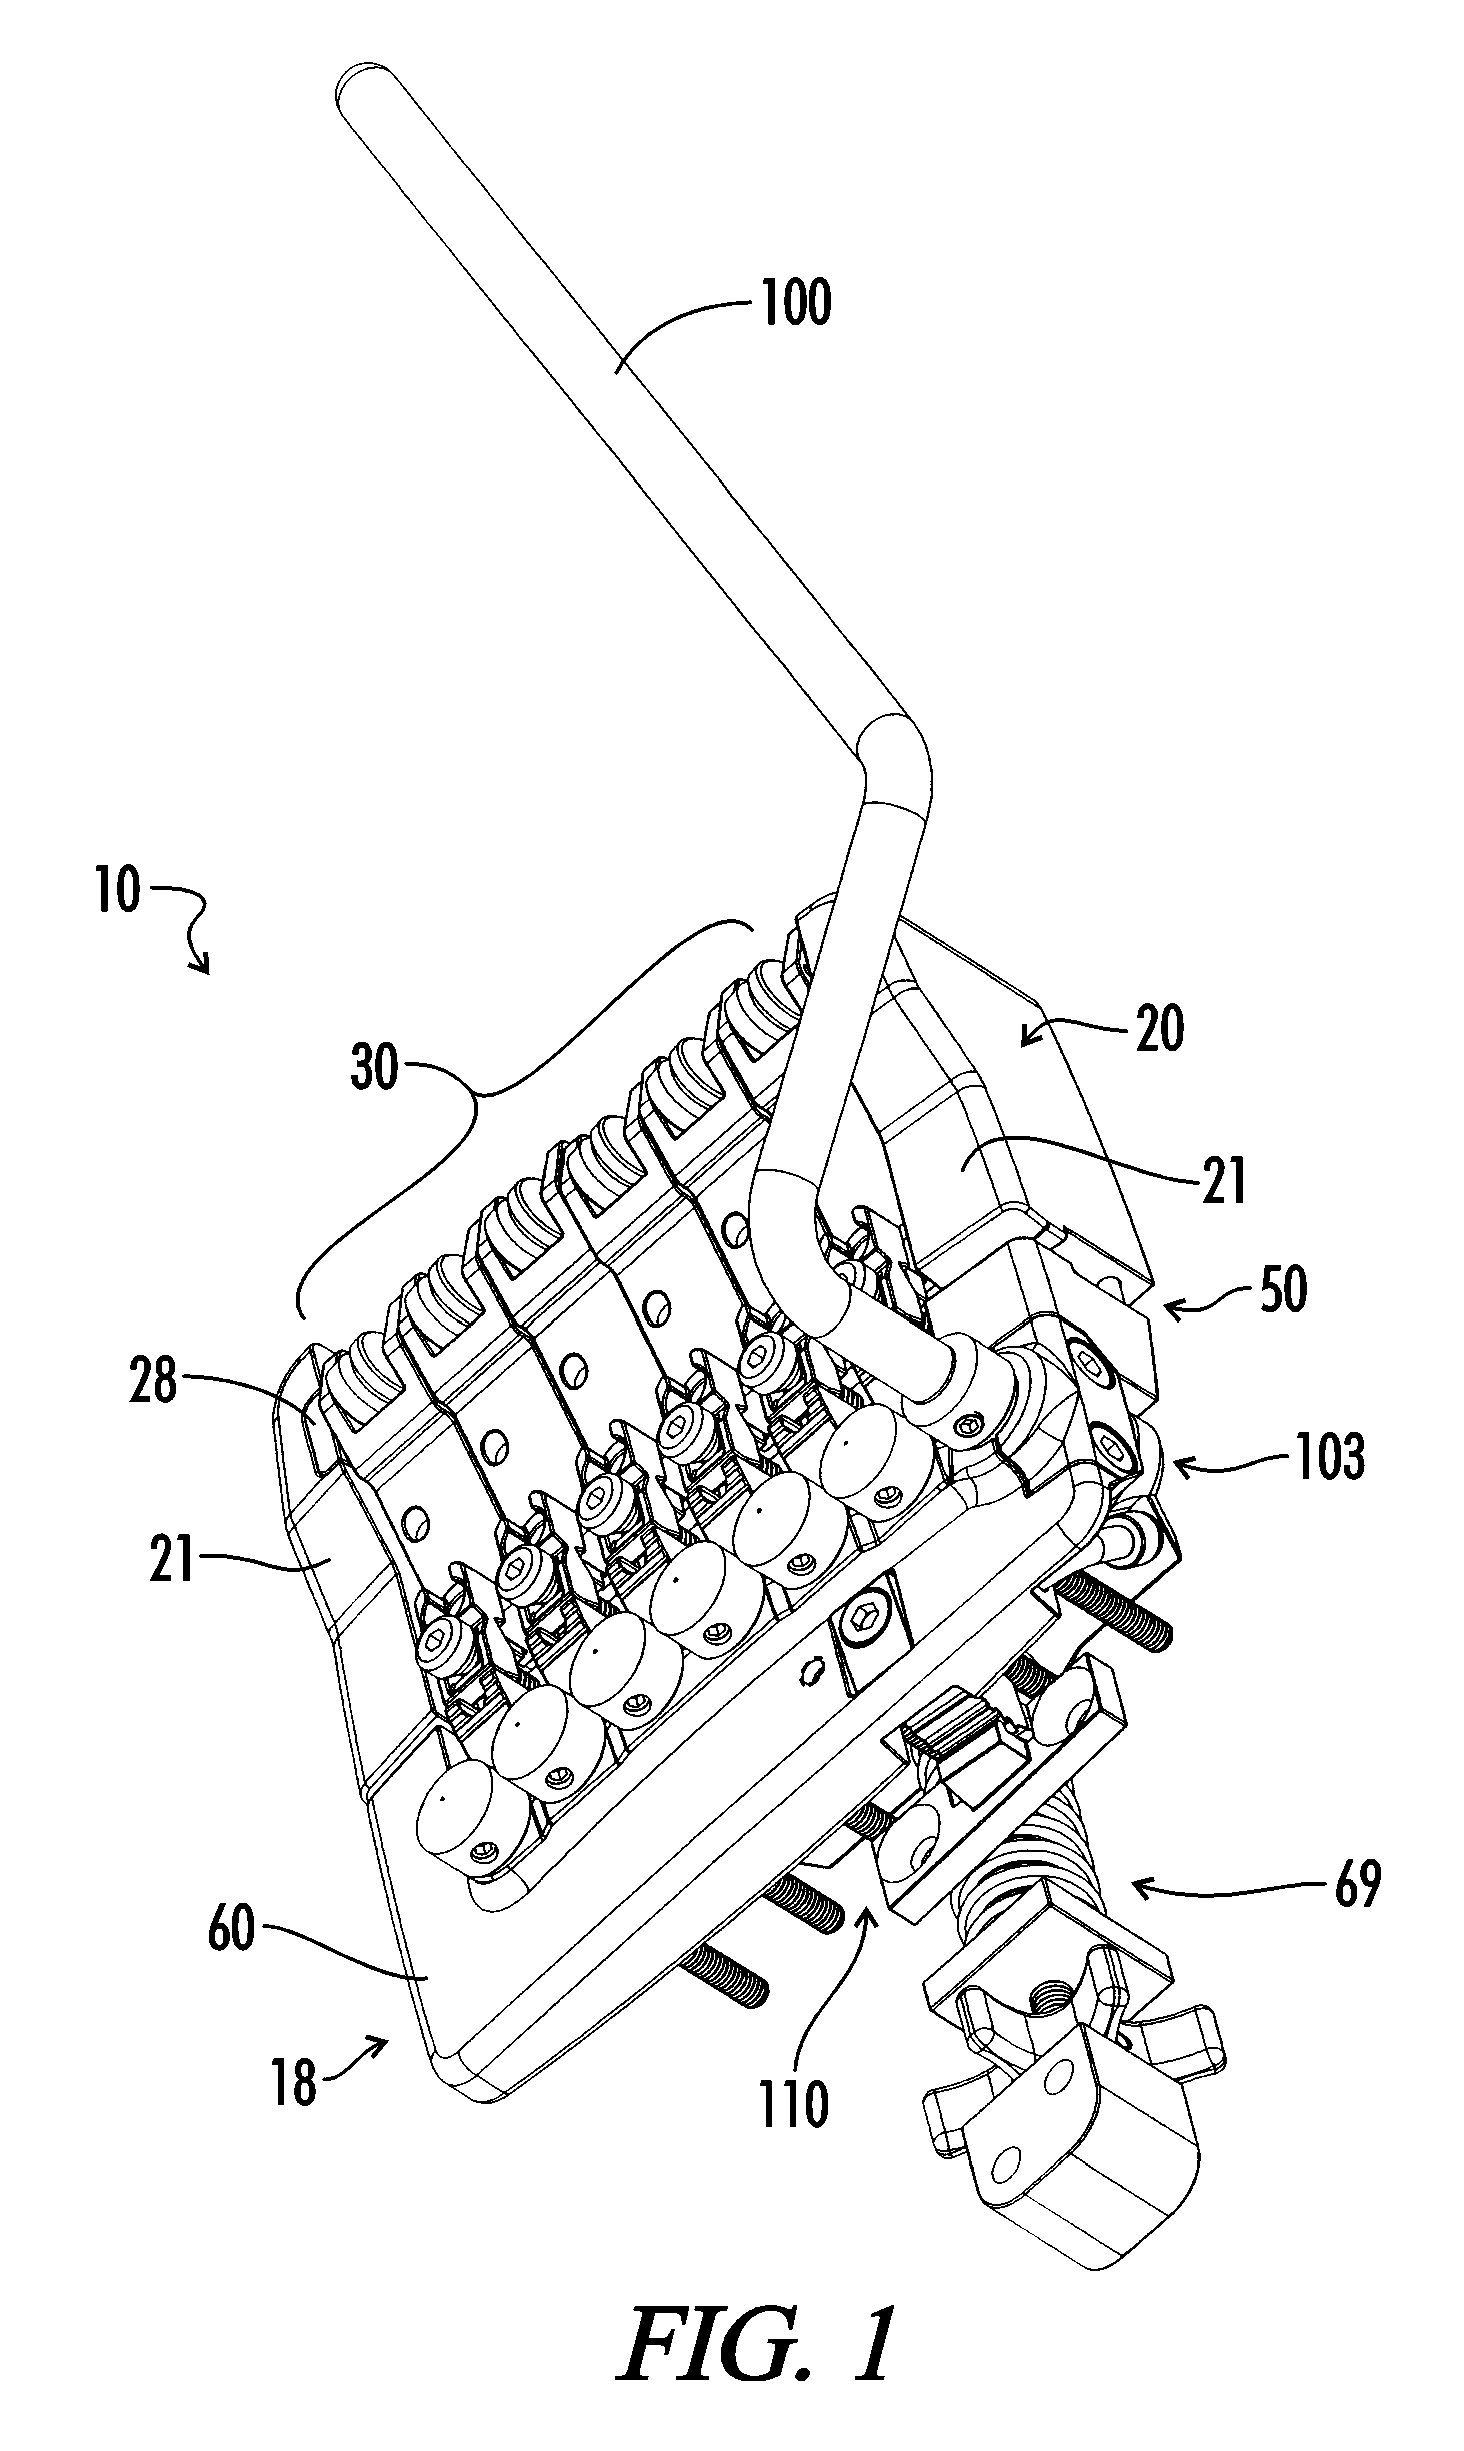 Tremolo mechanism for a stringed musical instrument with cam actuated lock